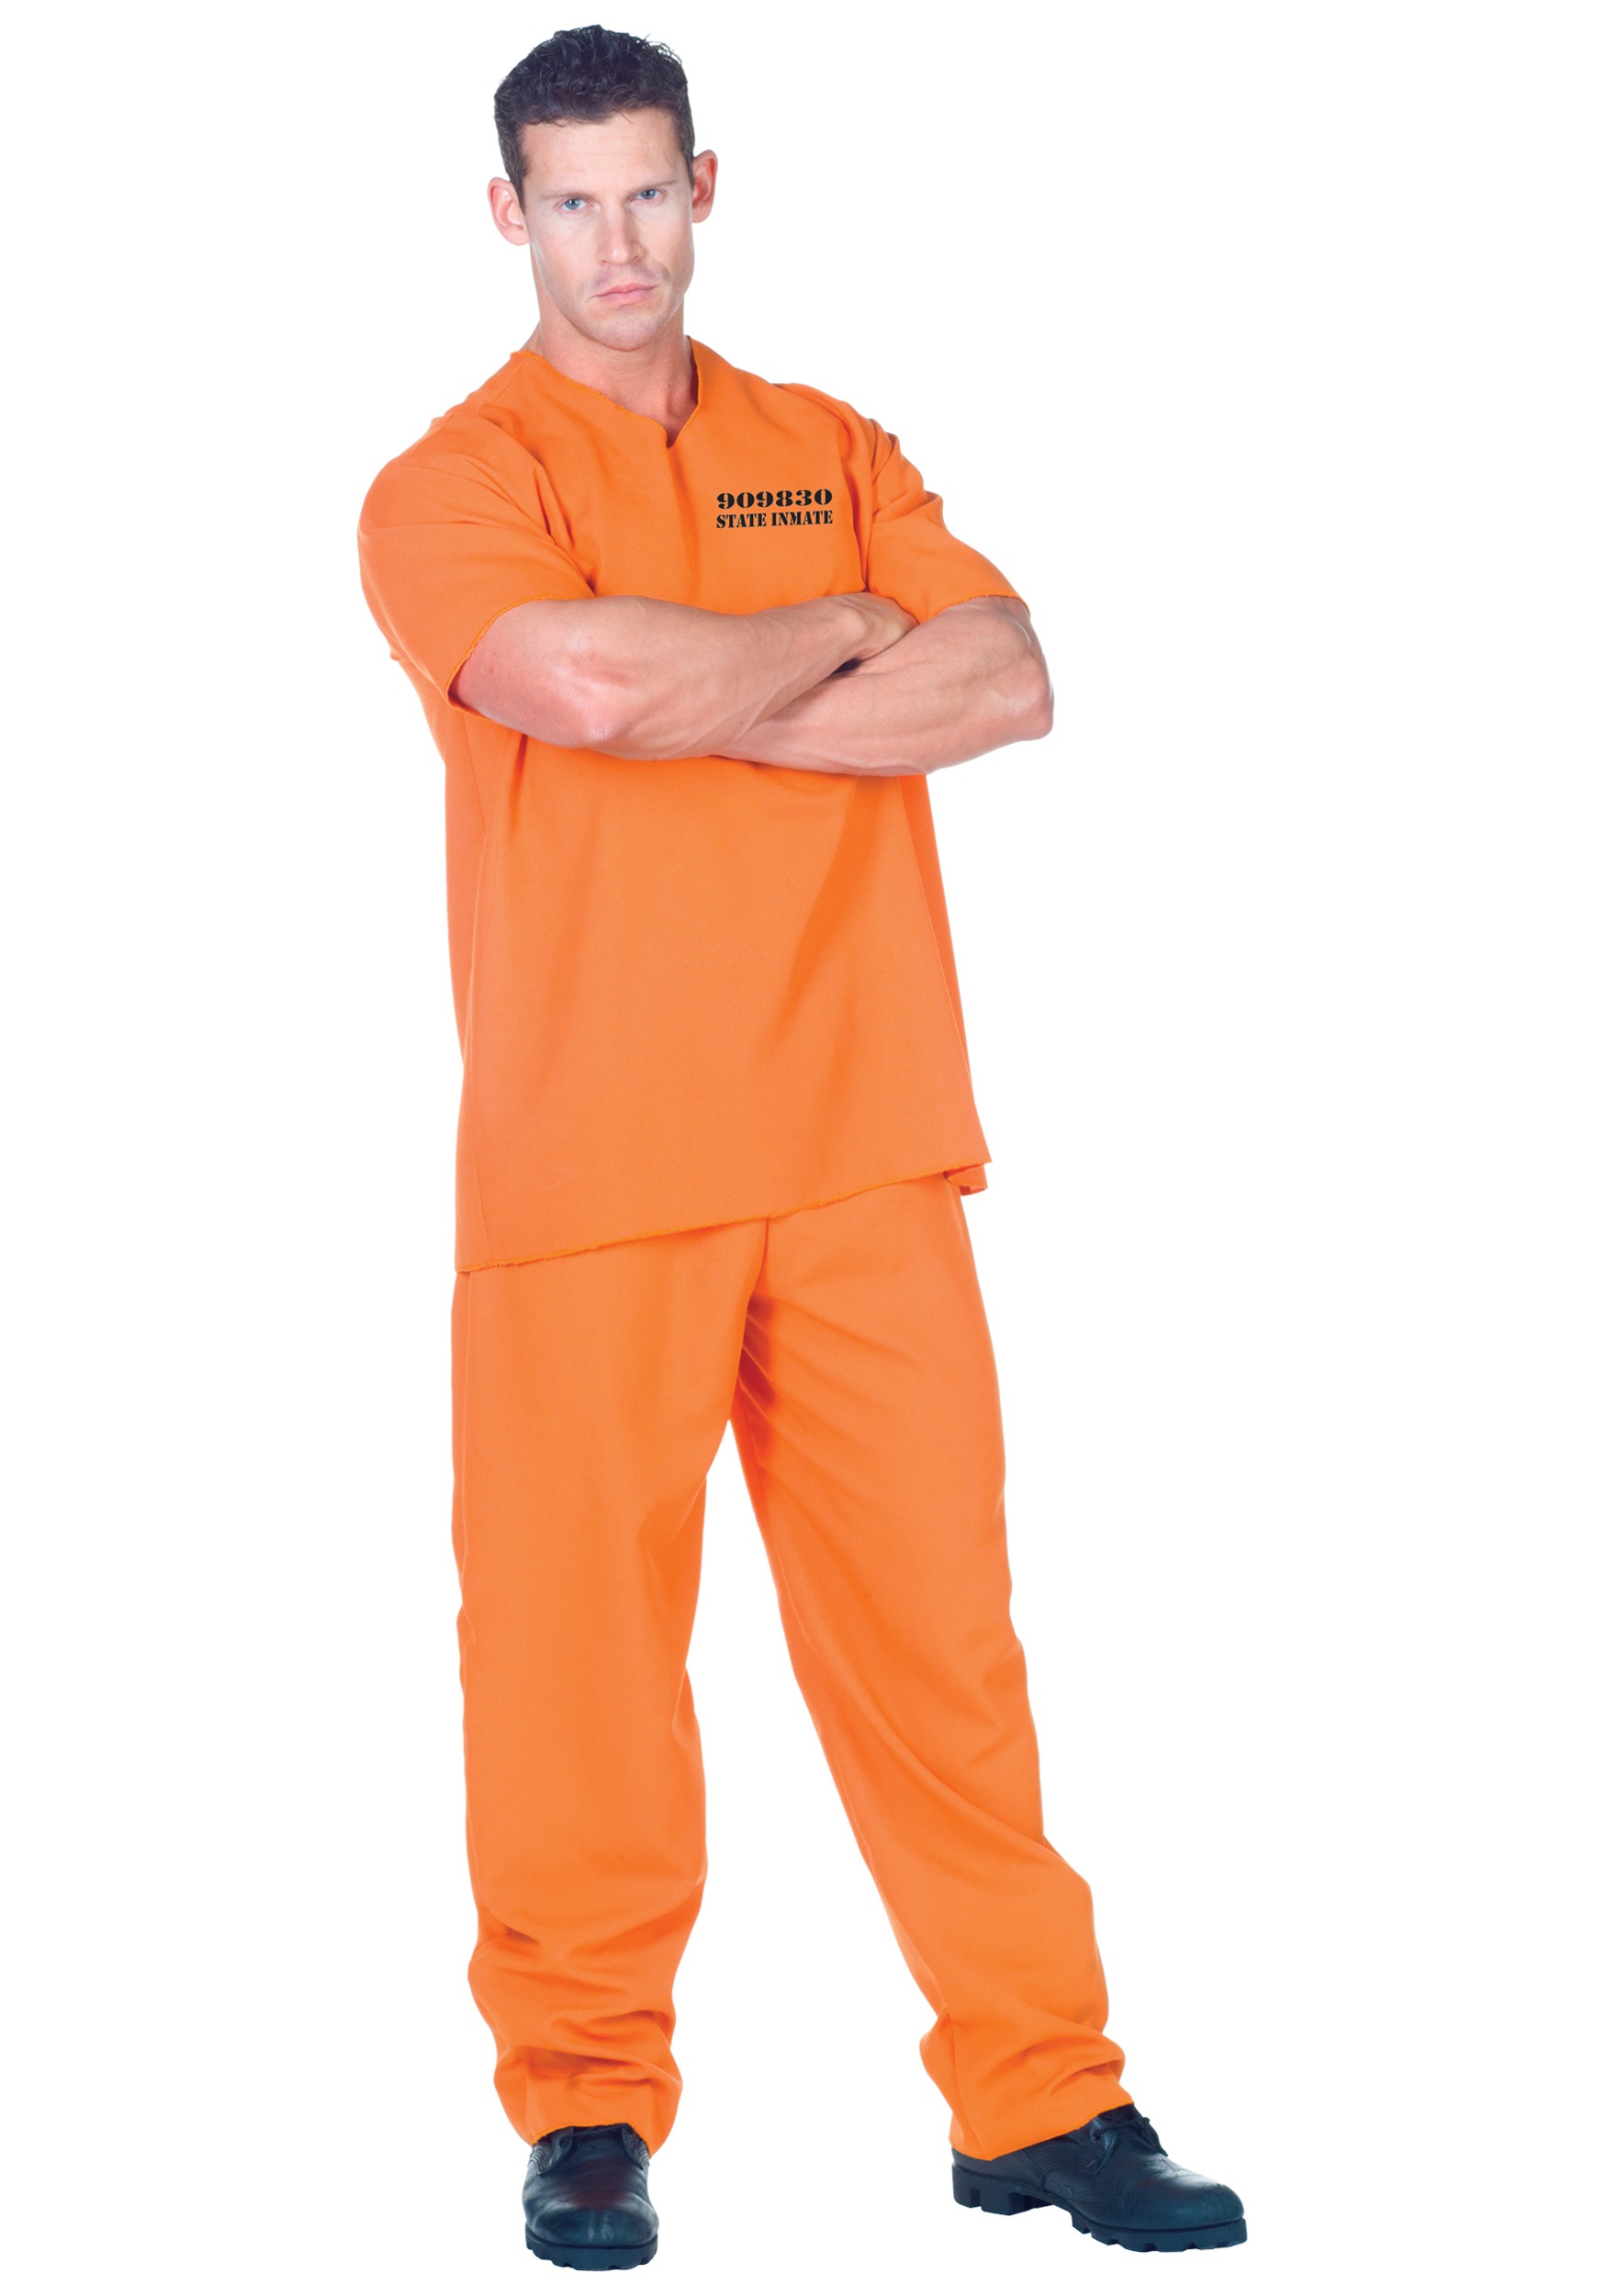 Public Offender Inmate Costume for Men